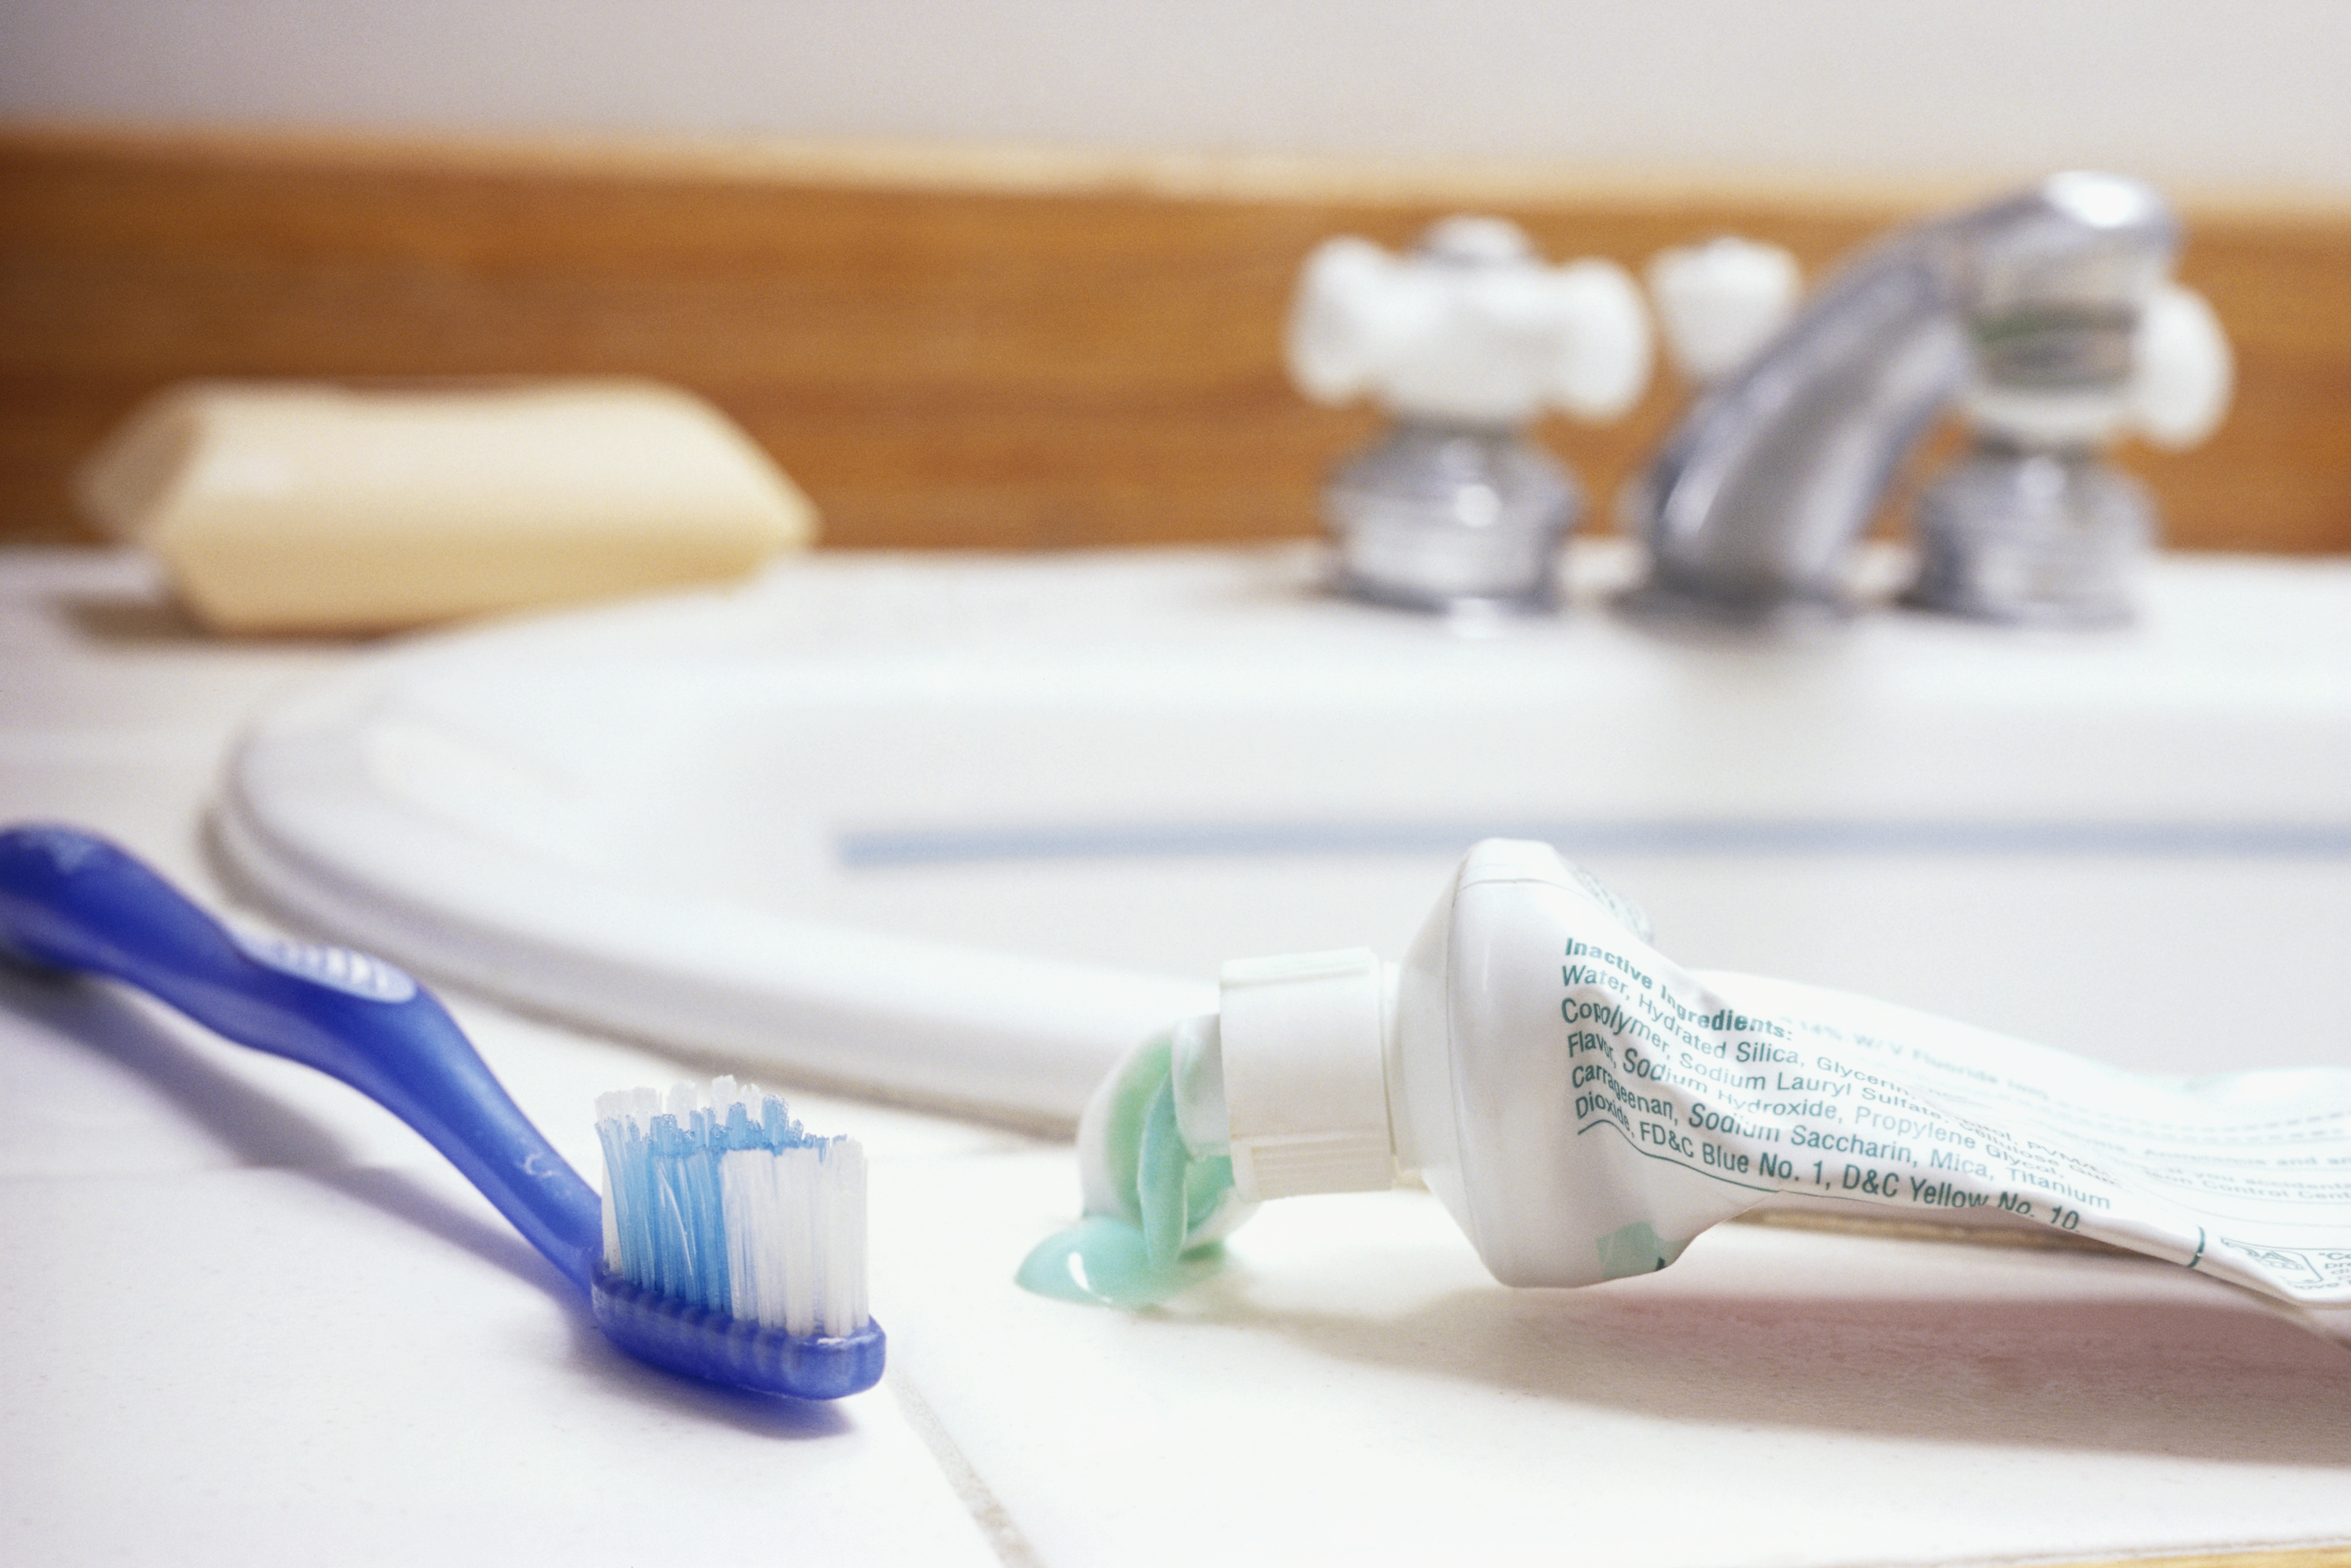 A toothbrush and toothpaste tube laying on a bathroom counter